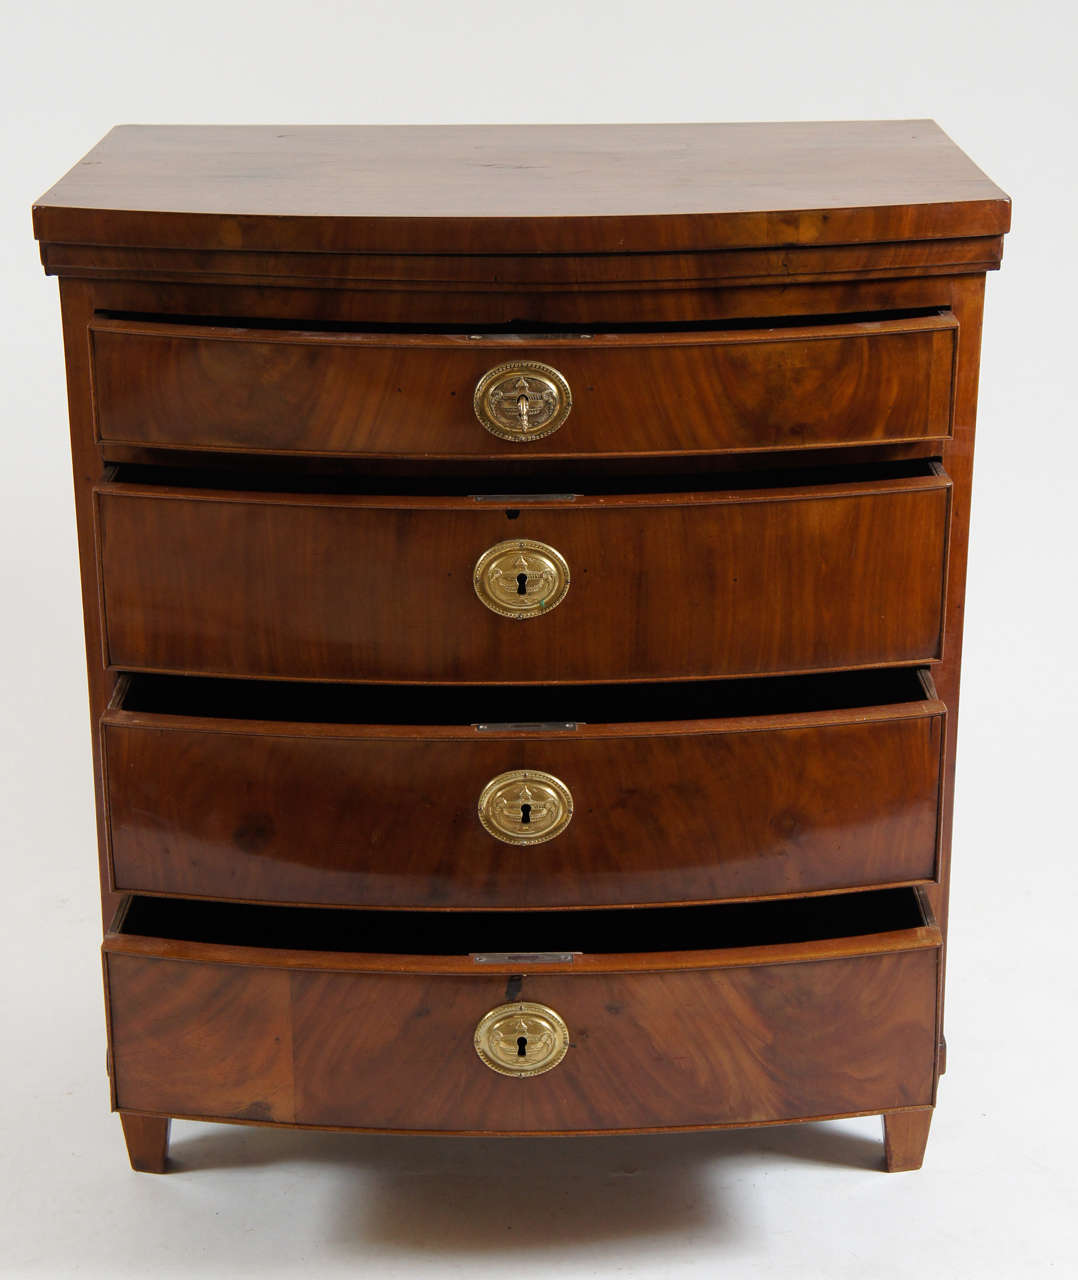 19th Century Fine Danish Bow-front Commode or Chest, c. 1800